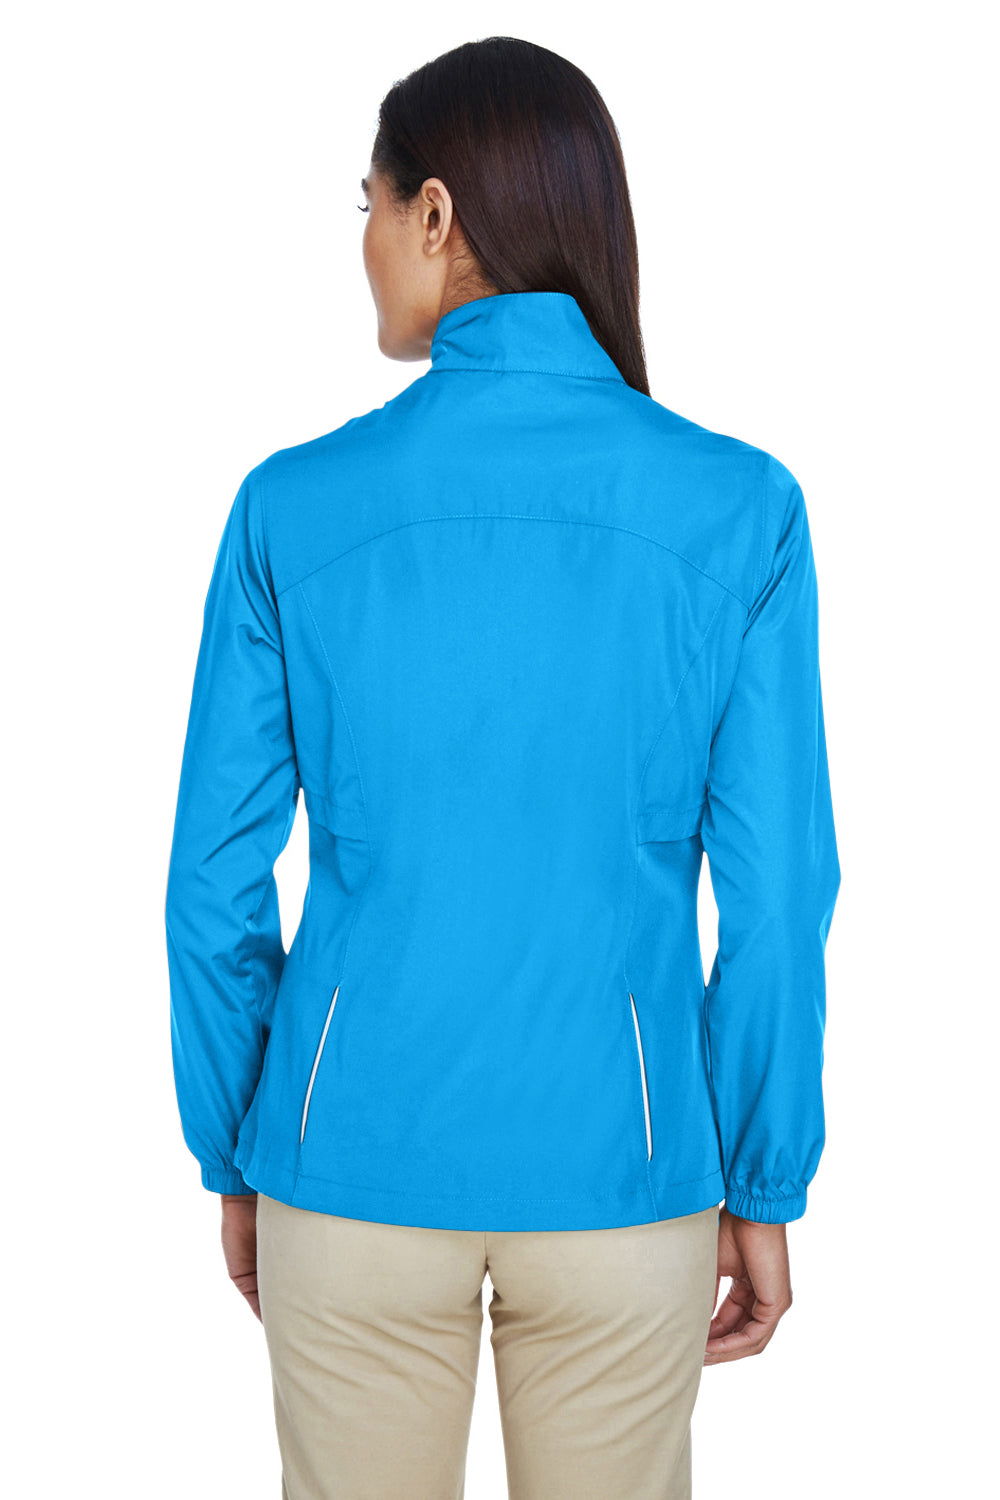 Core 365 78183 Womens Motivate Water Resistant Full Zip Jacket Electric Blue Back